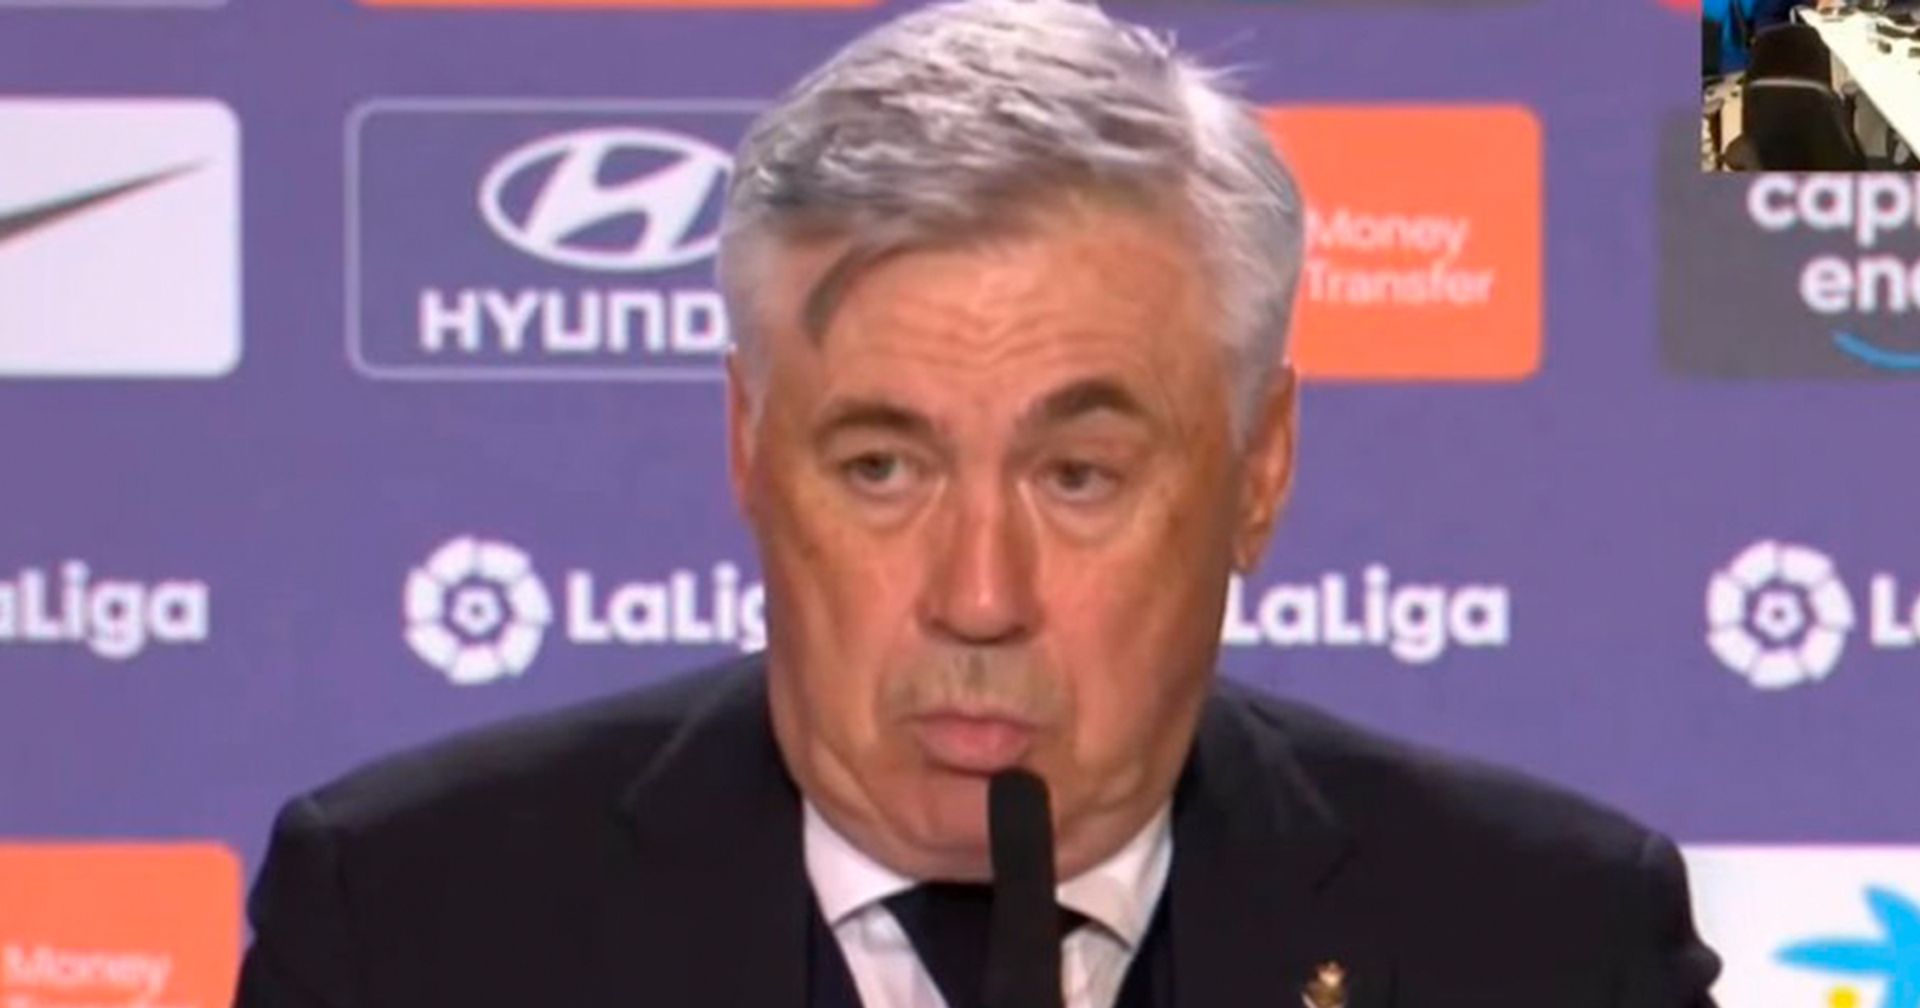 'We didn't need any points tonight': Ancelotti shares his plan ahead of Champions League final